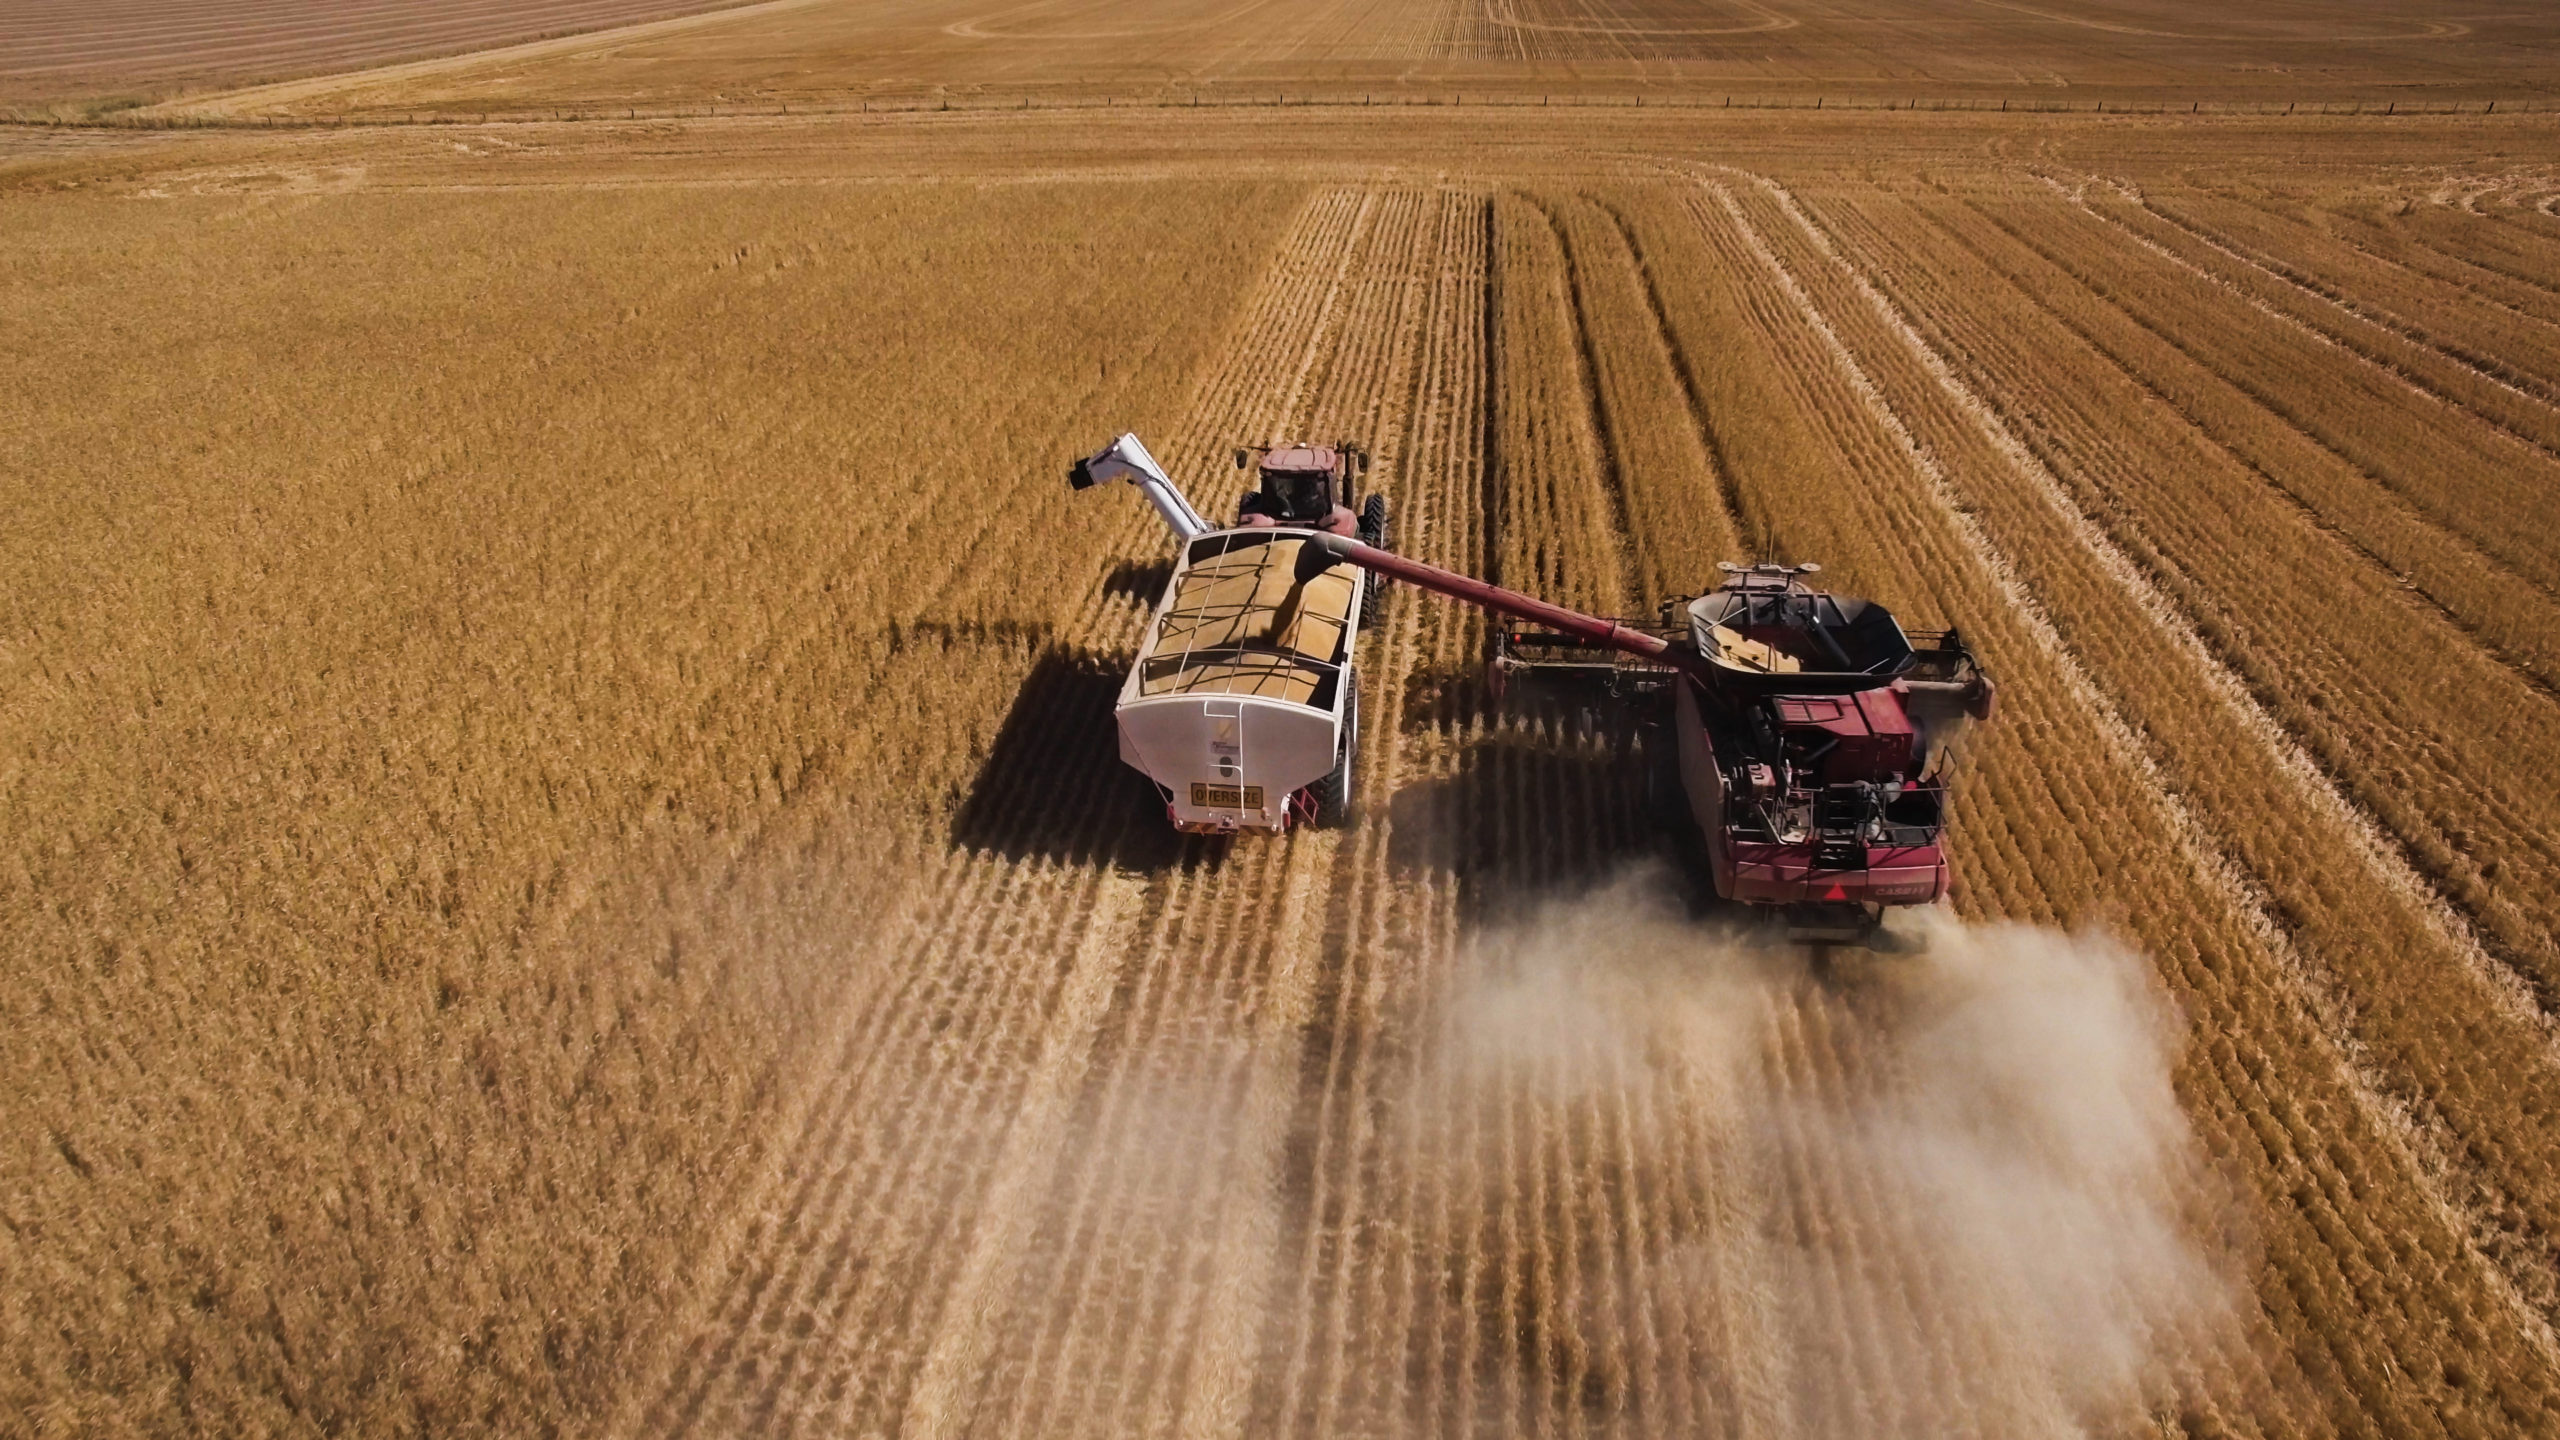 Drone shot behind harvester and support truck working a wheat field.